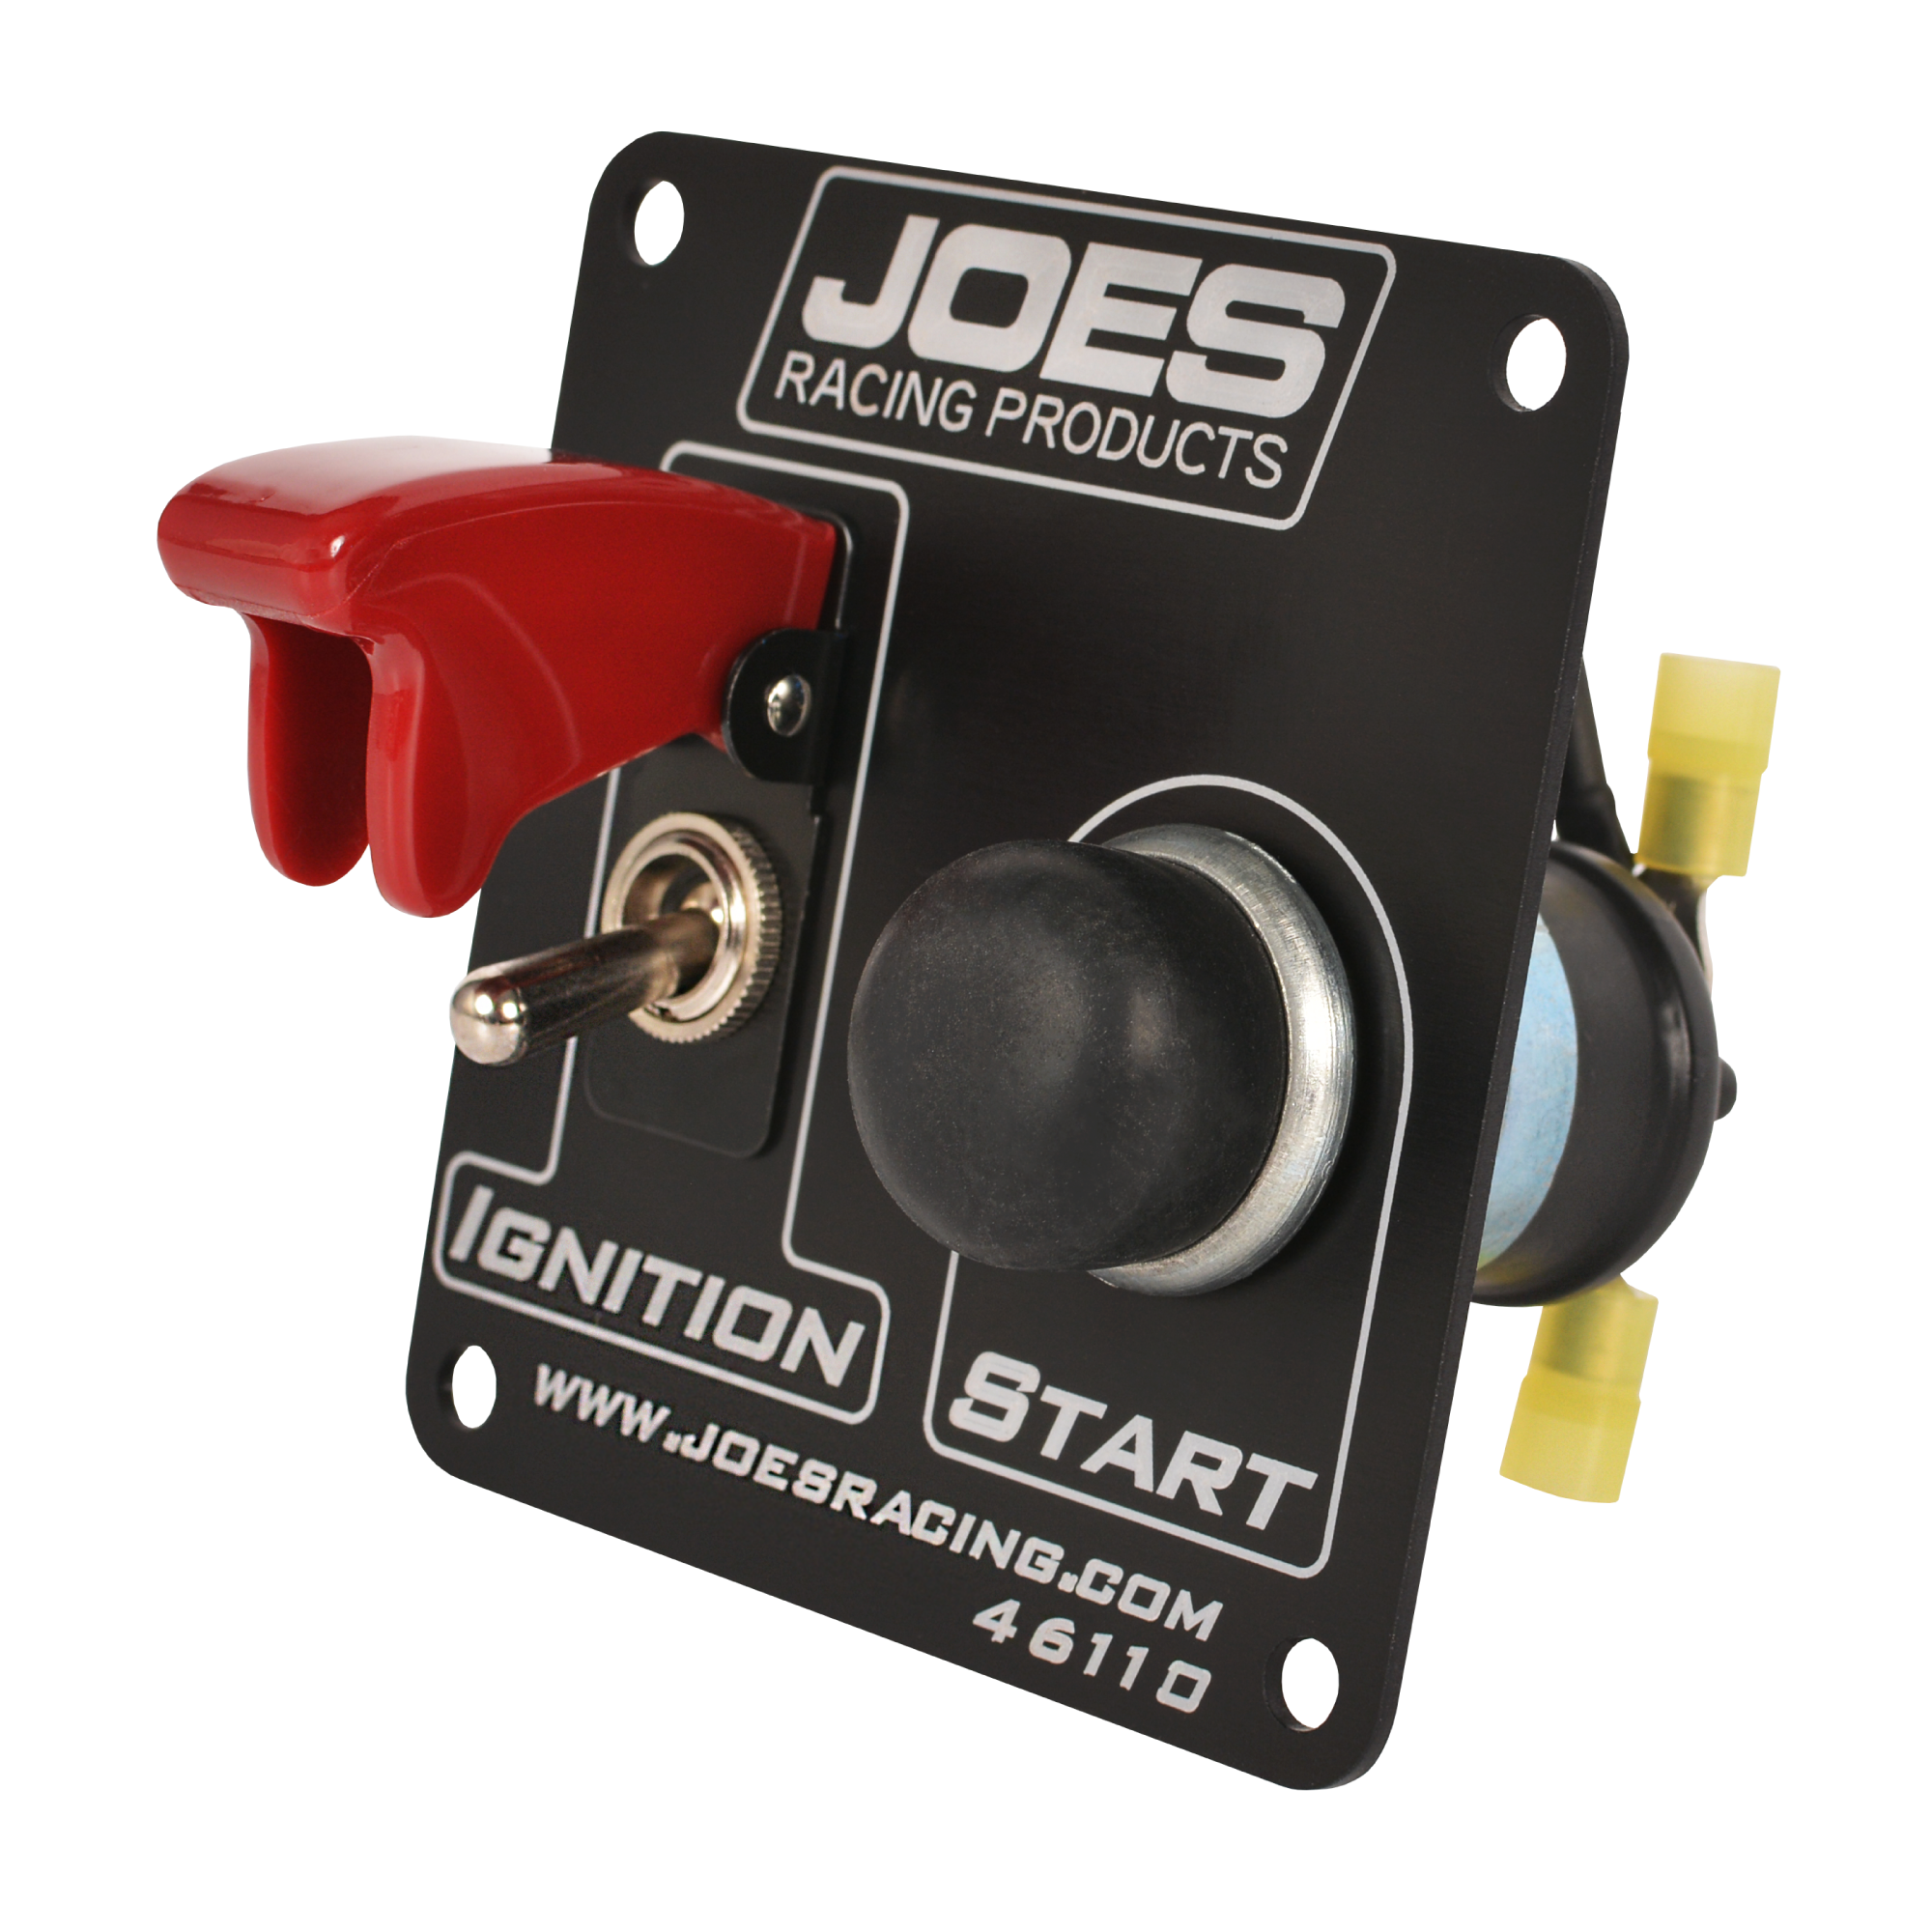 Joes Racing Products 46110 Switch Panel Ignition Start